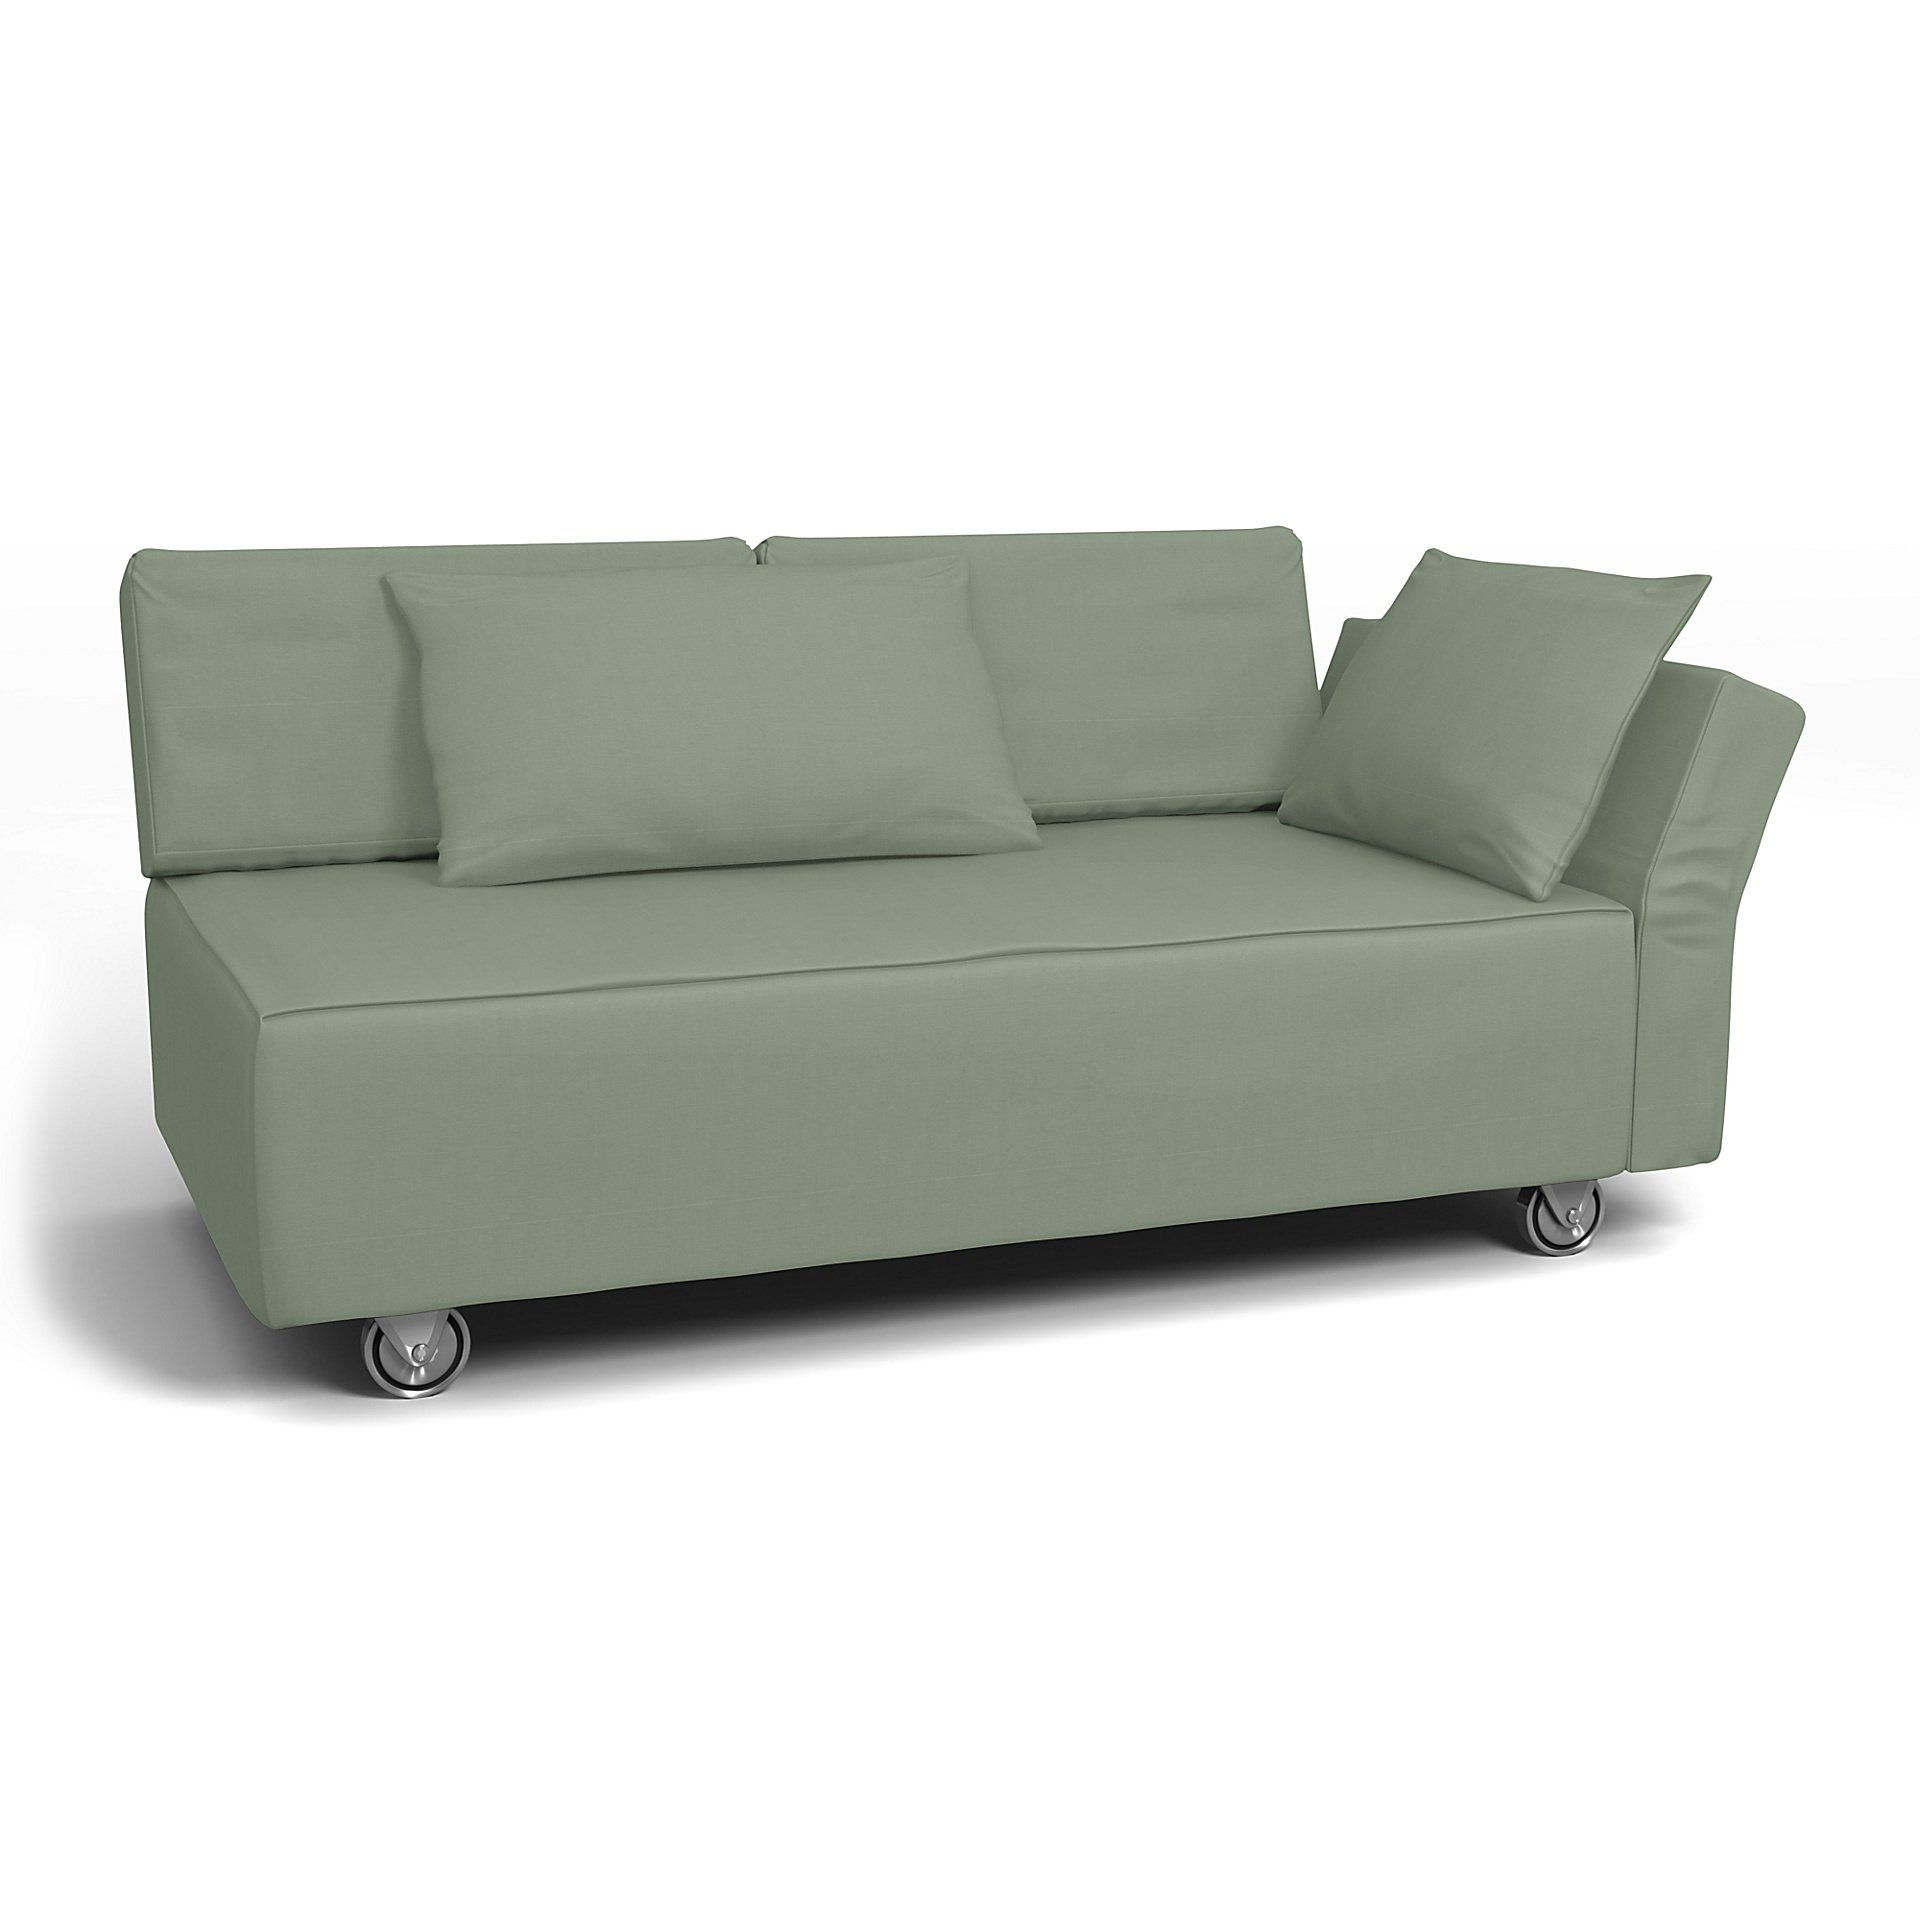 IKEA - Falsterbo 2 Seat Sofa with Right Arm Cover, Seagrass, Cotton - Bemz